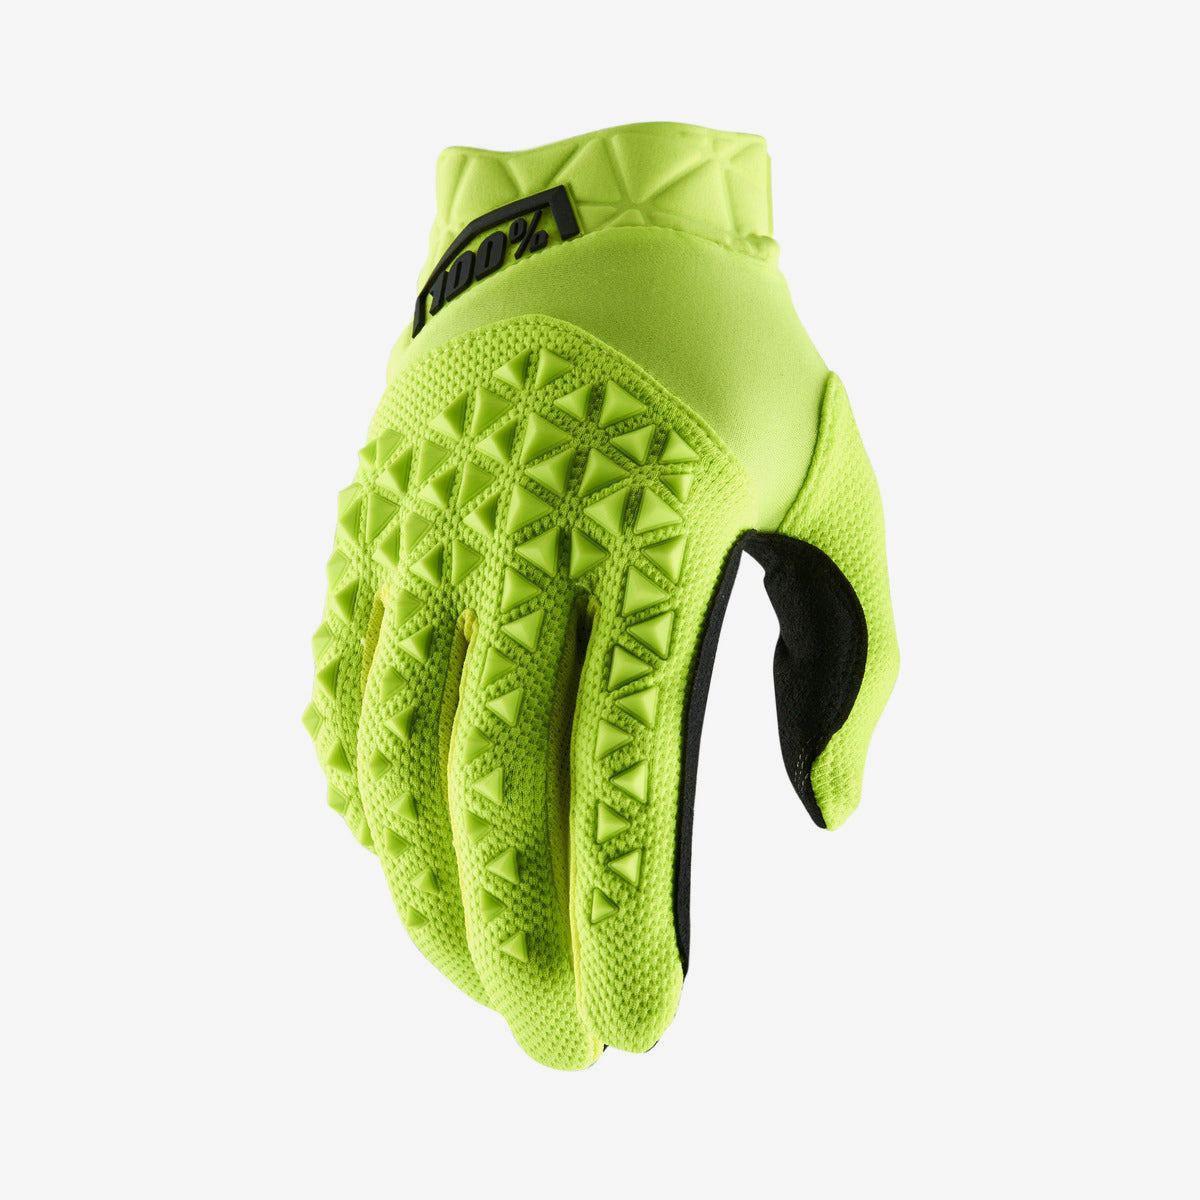 AIRMATIC Youth Glove - Fluo Yellow/Black